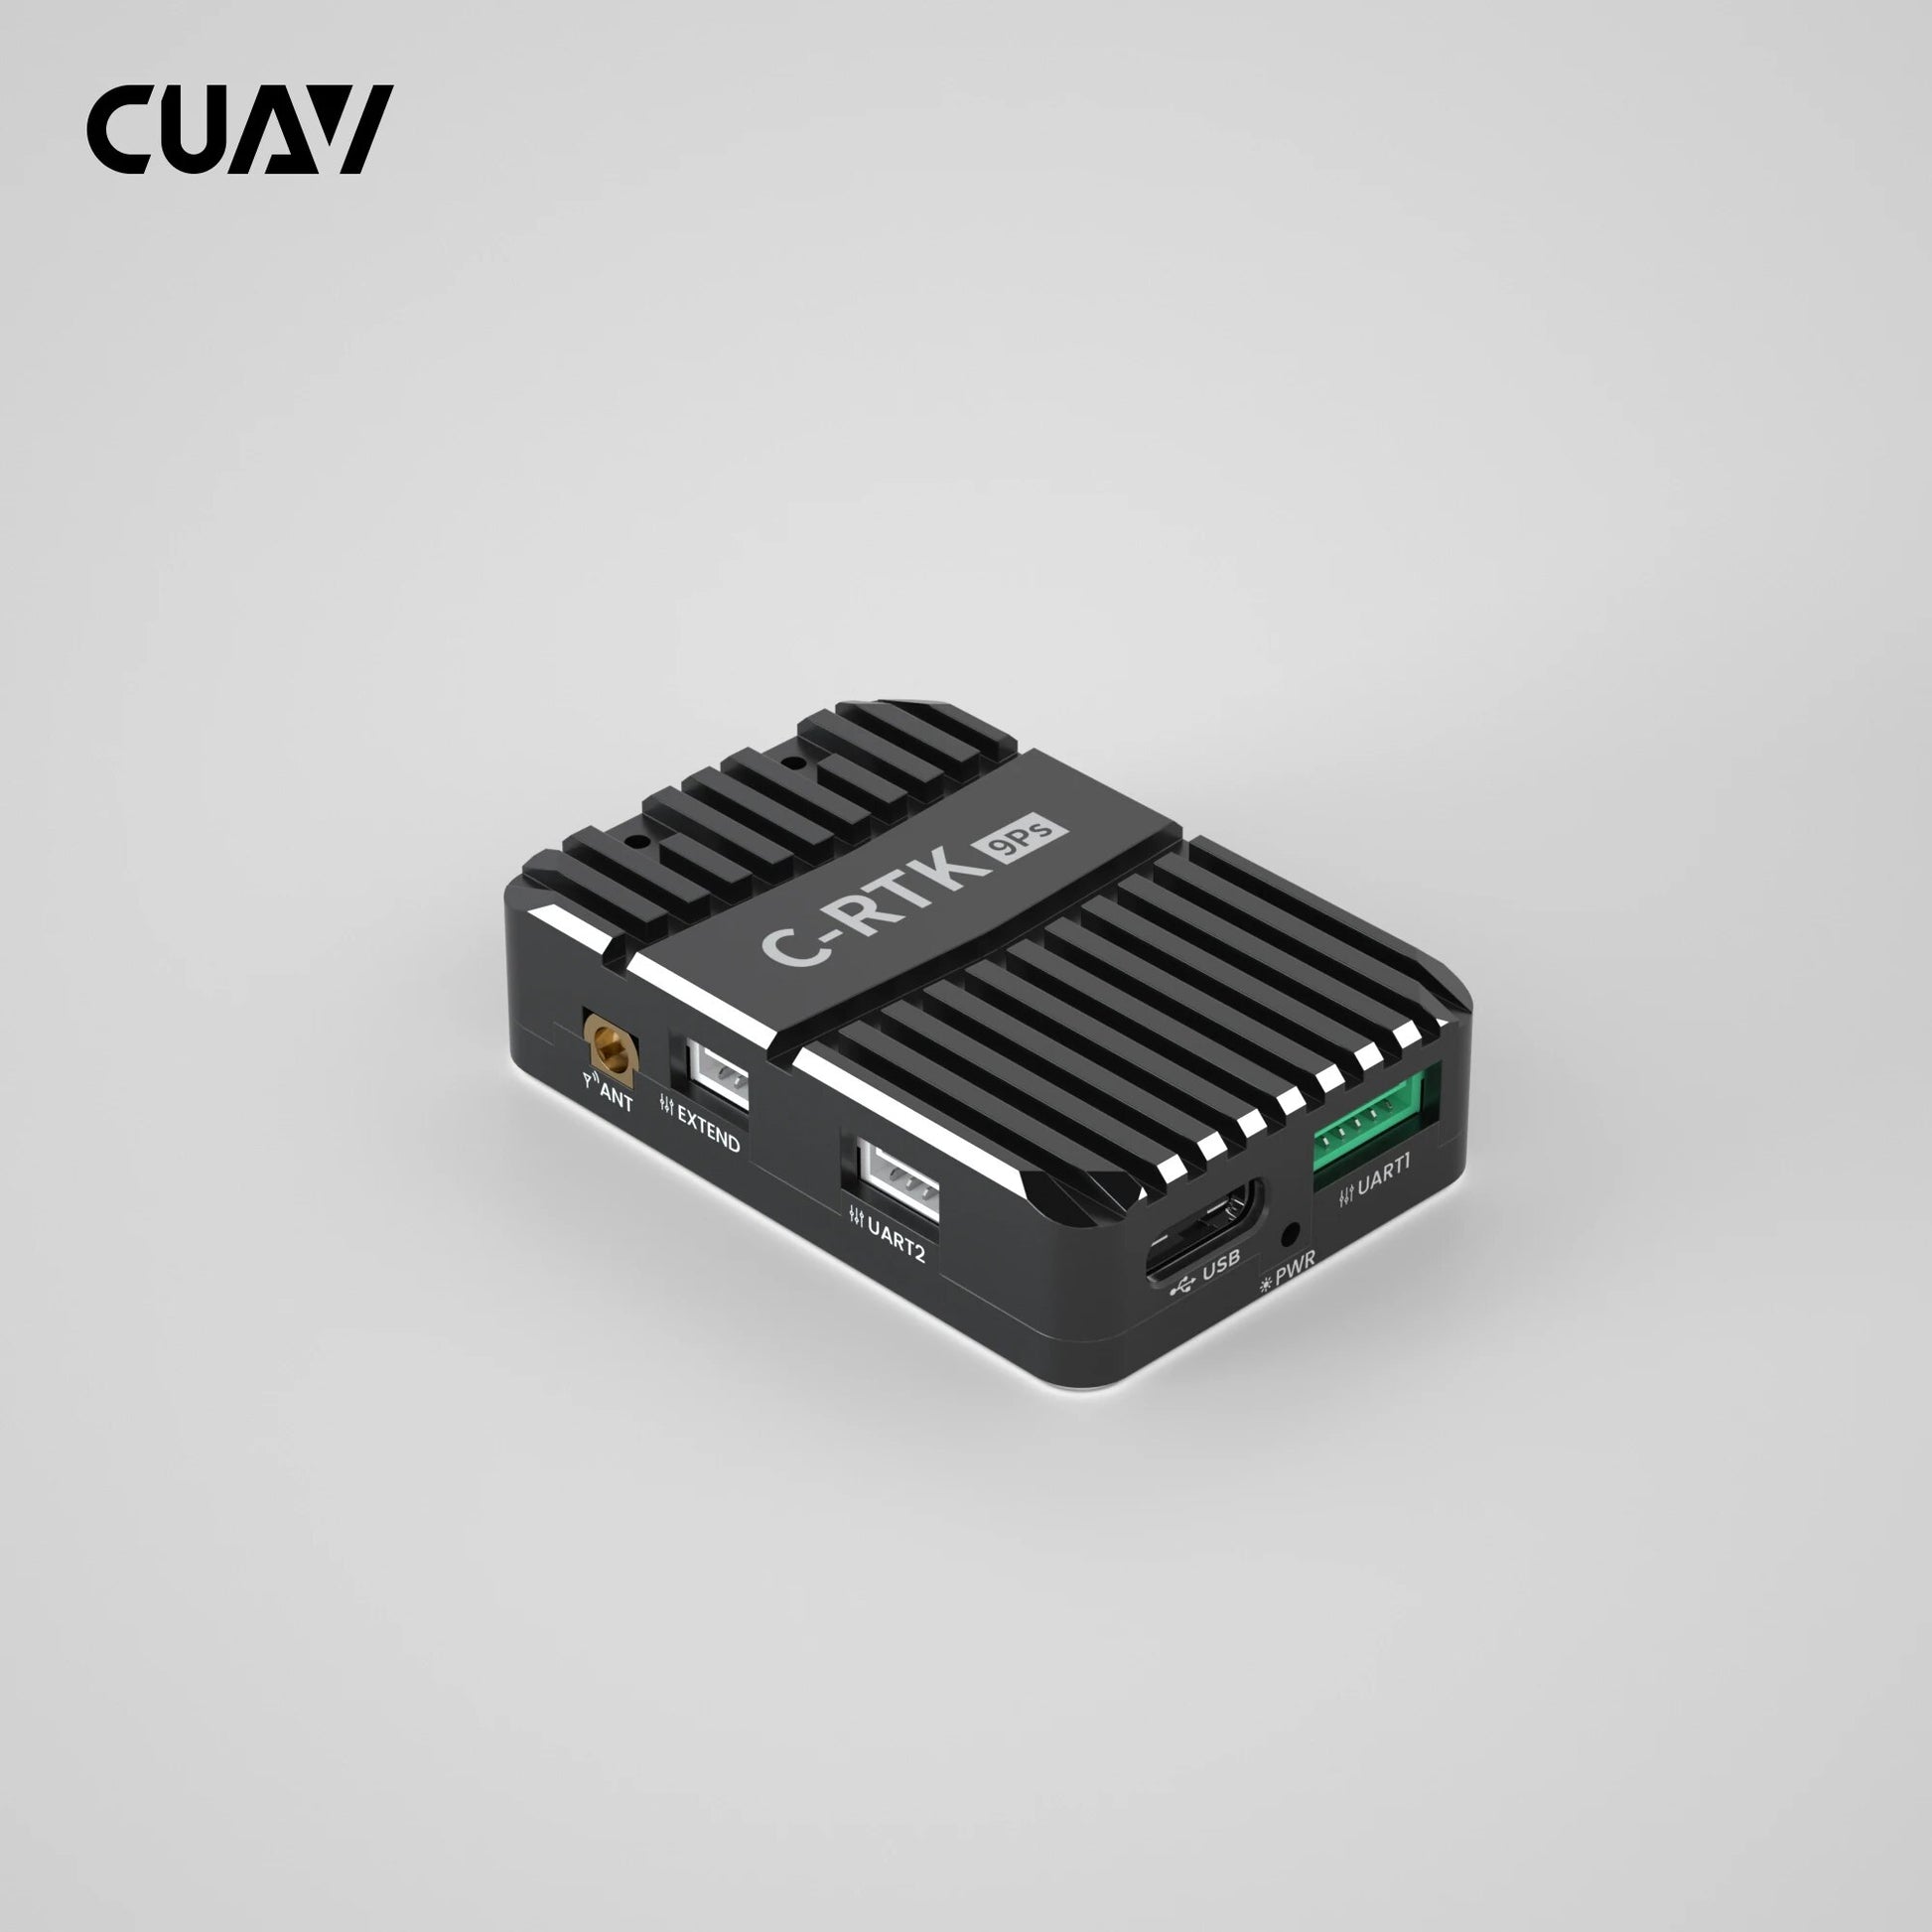 CUAV Dual RTK 9Ps For Yaw GPS - Centimeter-level High Percision Precise Positioning Multi-Star Multi-Frequency GNSS Module